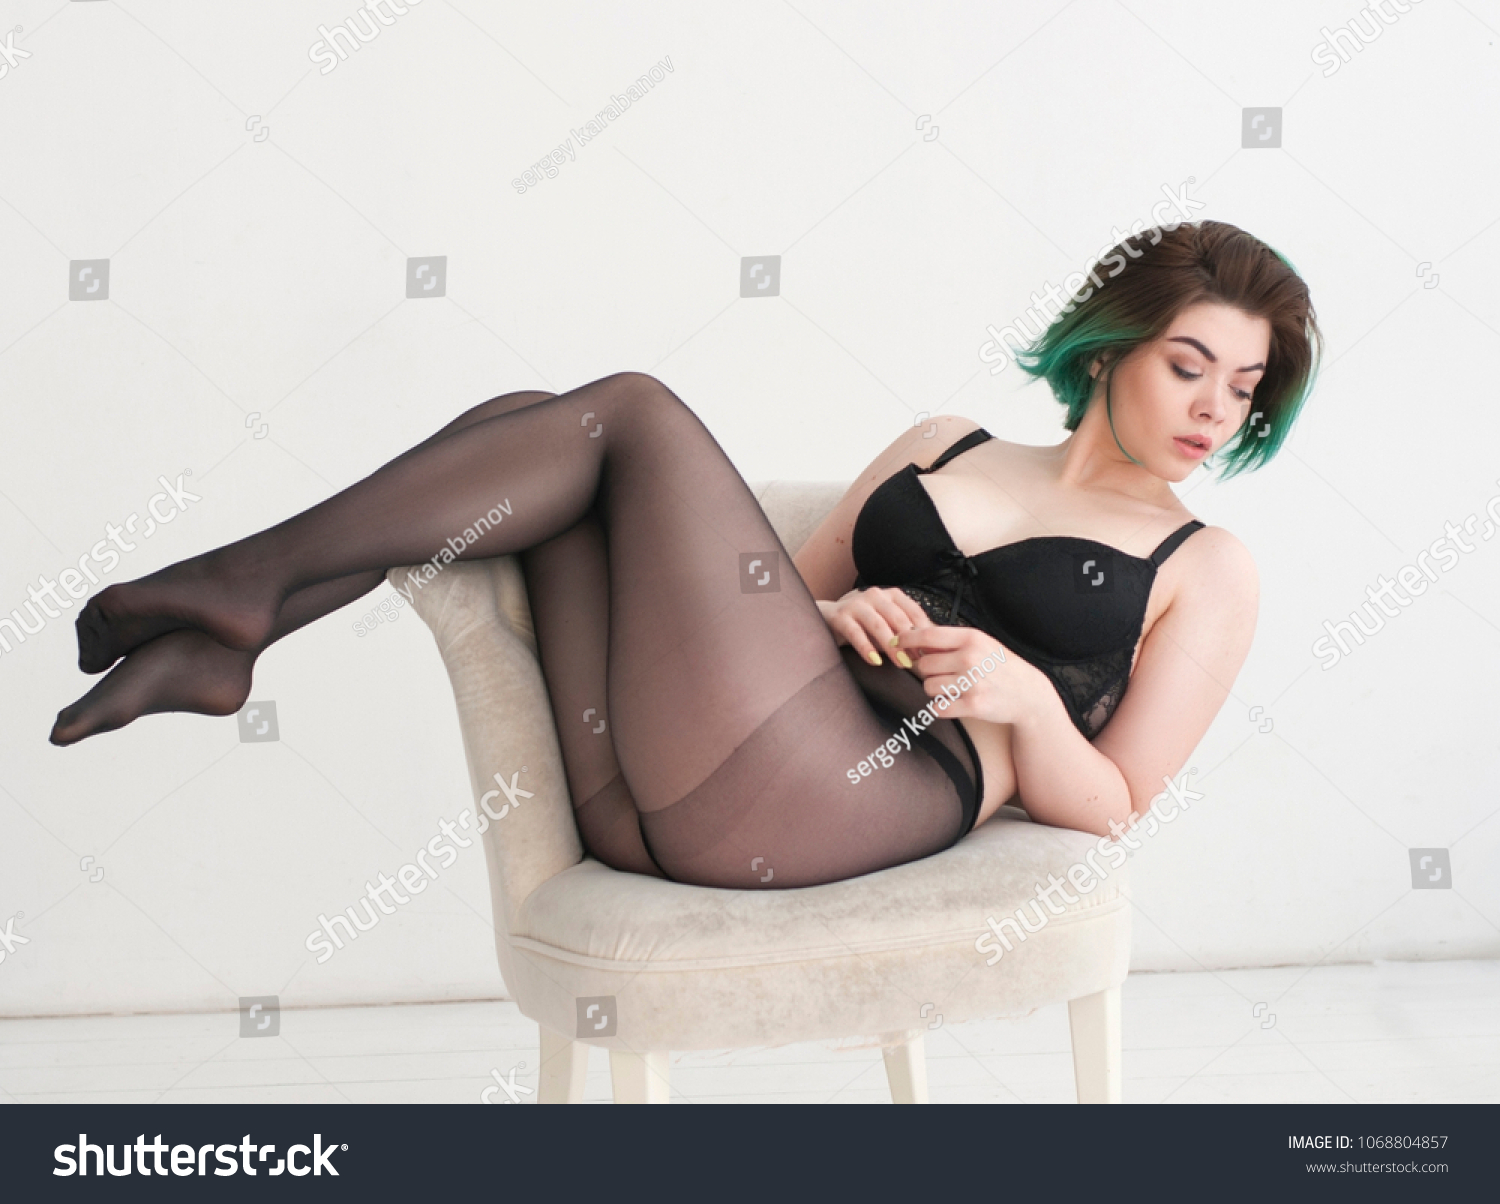 191 Stockings Bending Stock Photos, Images & Pictures